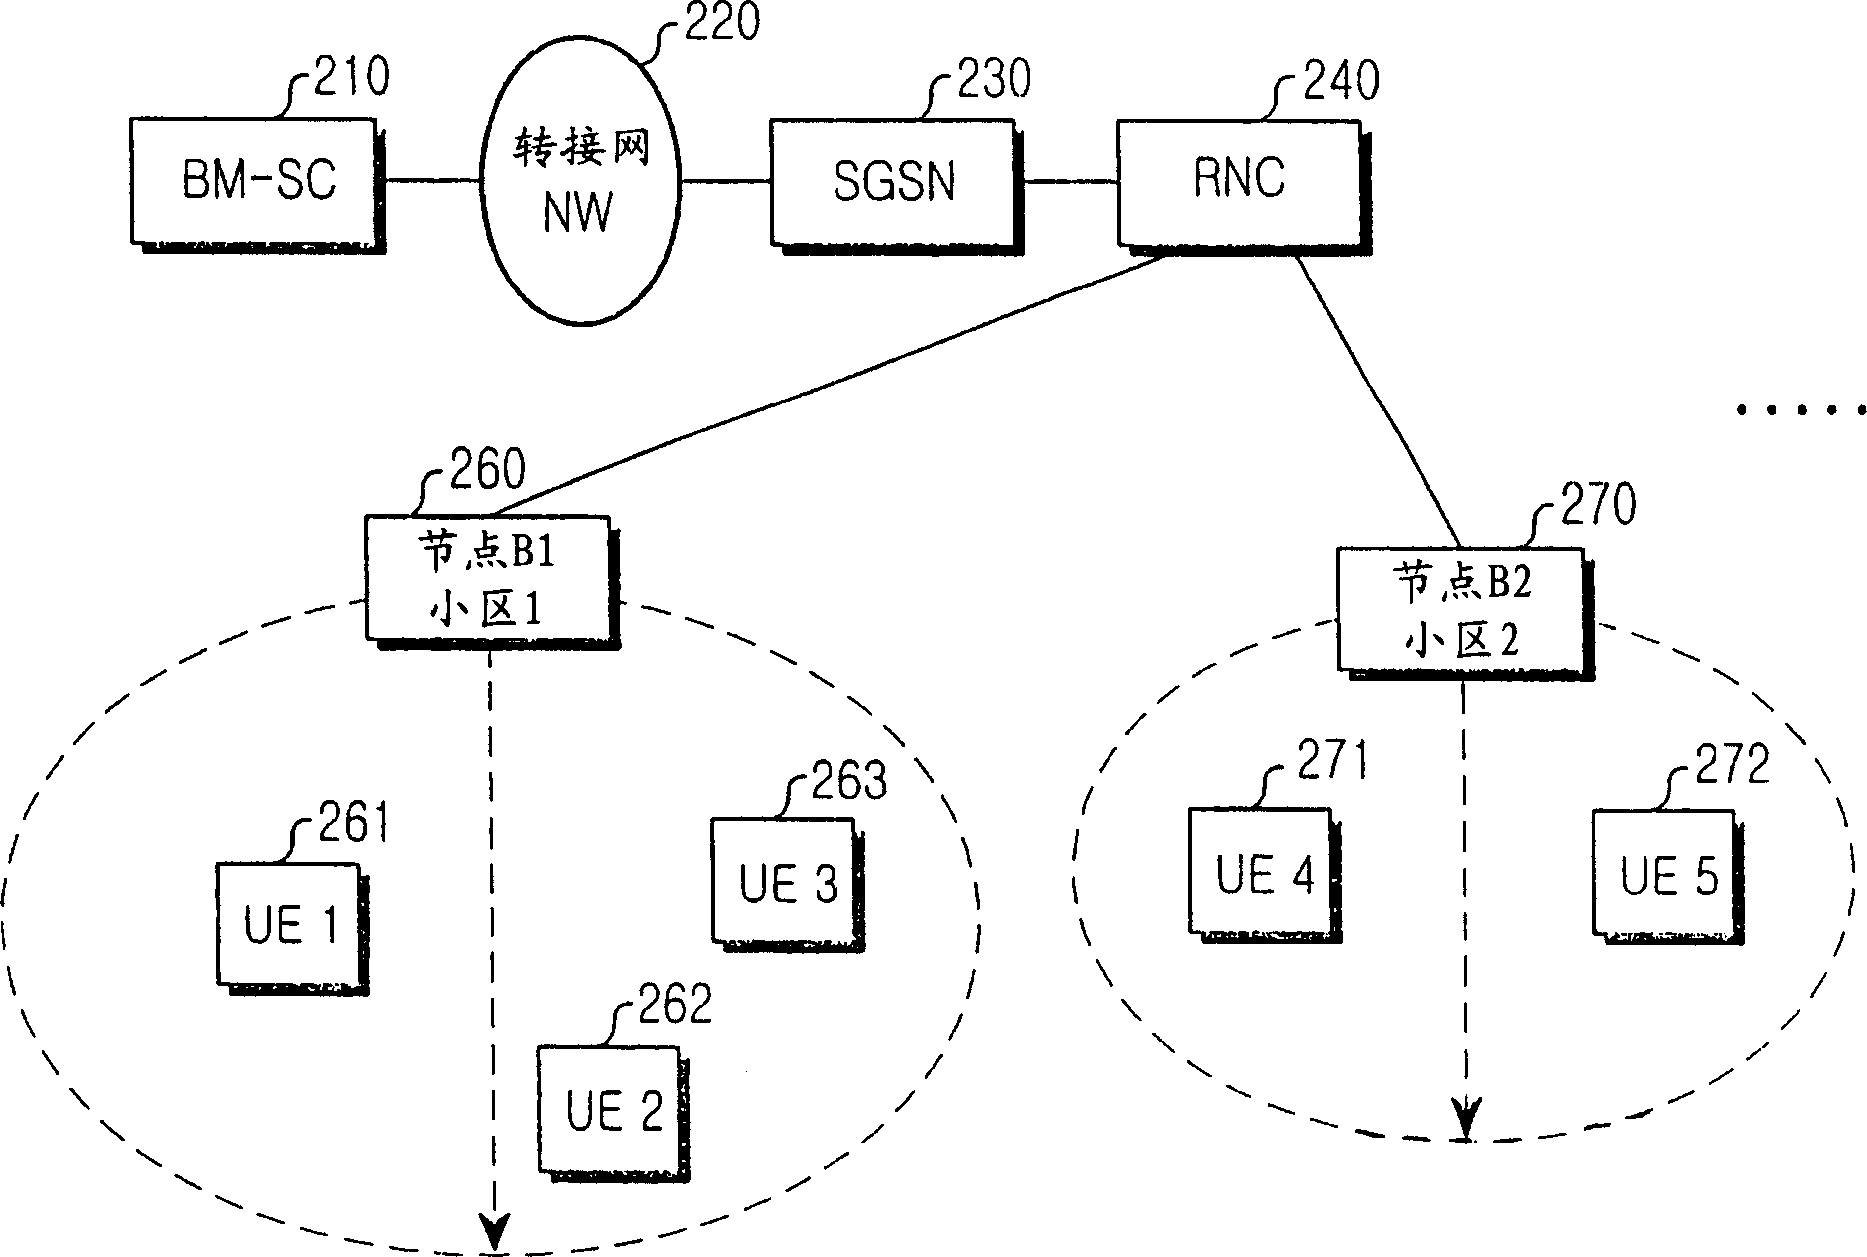 Method for re-selecting a cell for receiving packet data in a mobile communication system providing a multimedia broadcast/multicast service, particularly for transmitting information on a cell capabl